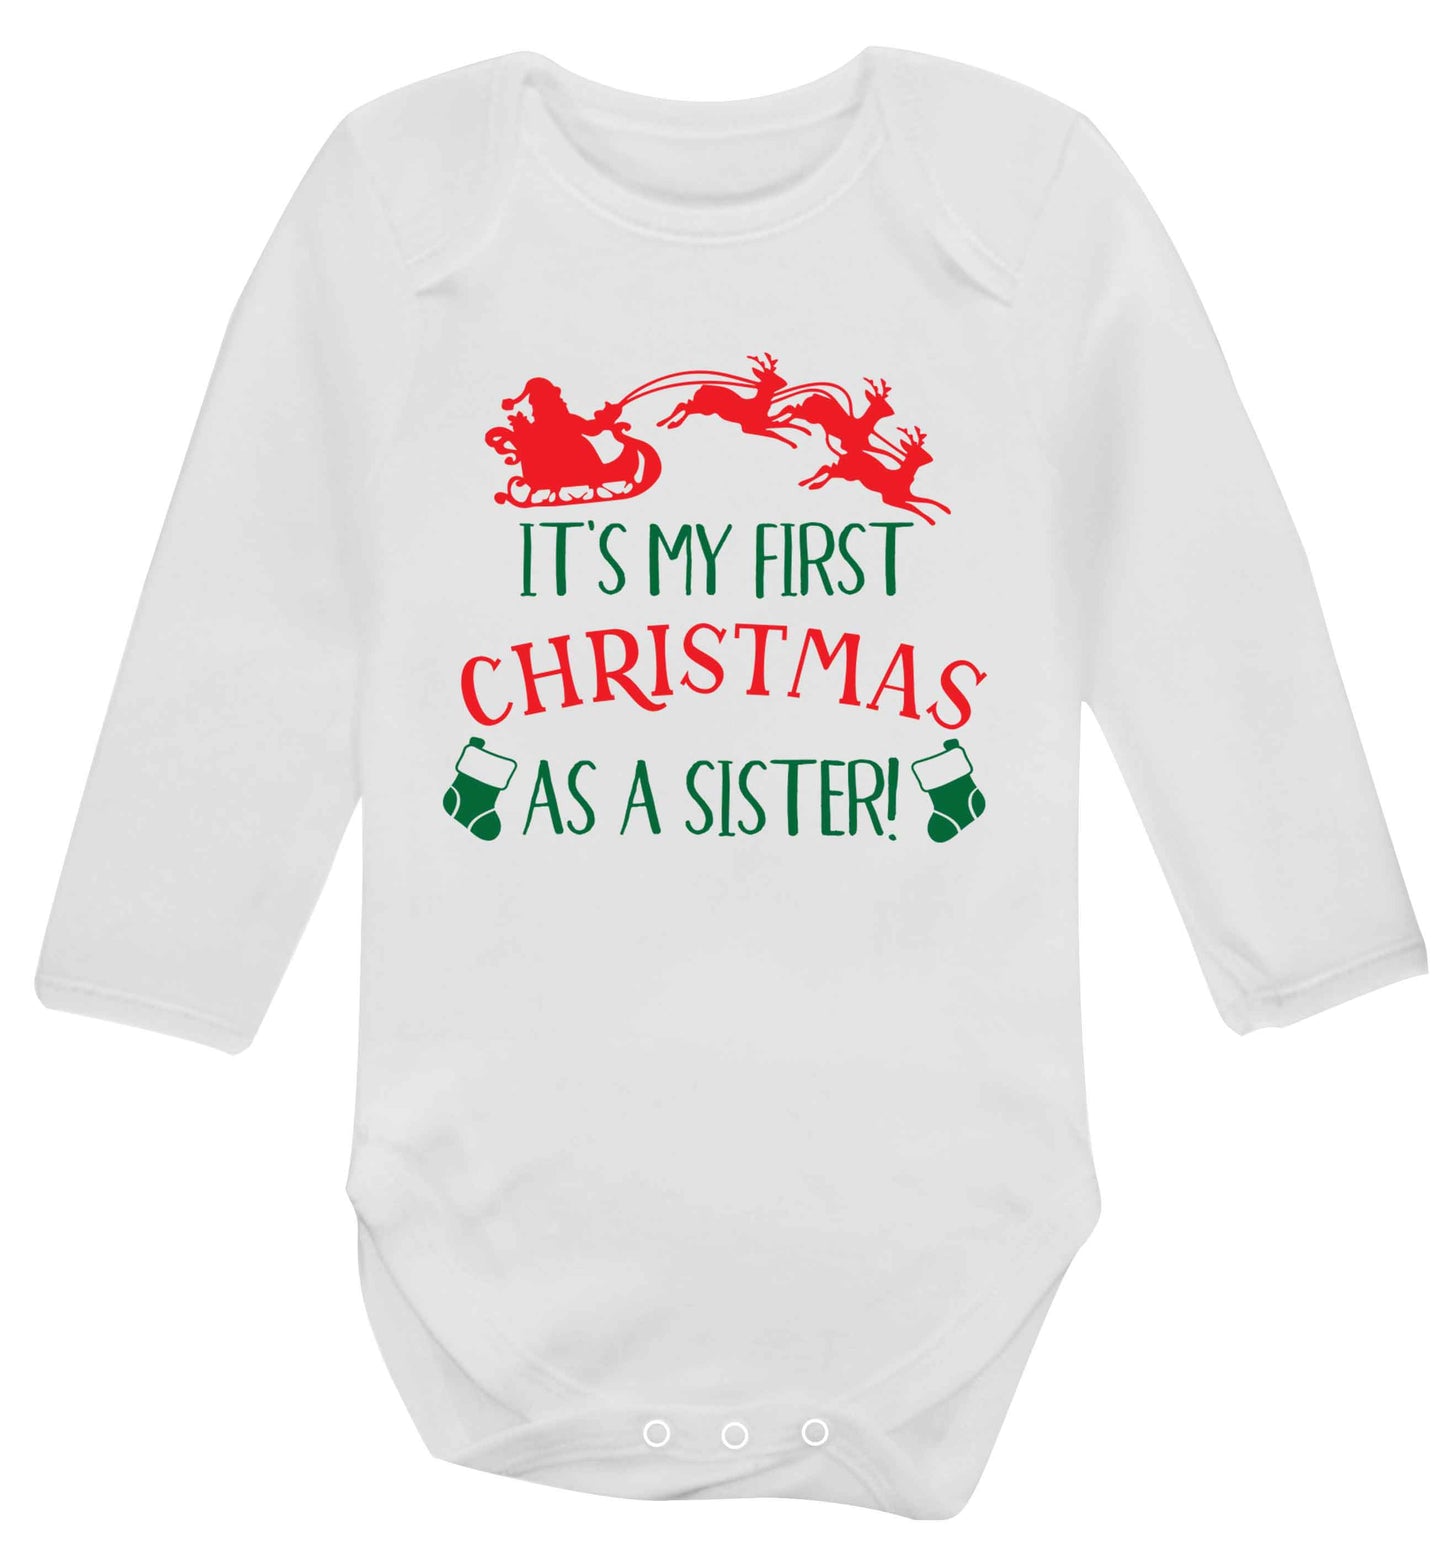 It's my first Christmas as a sister! Baby Vest long sleeved white 6-12 months